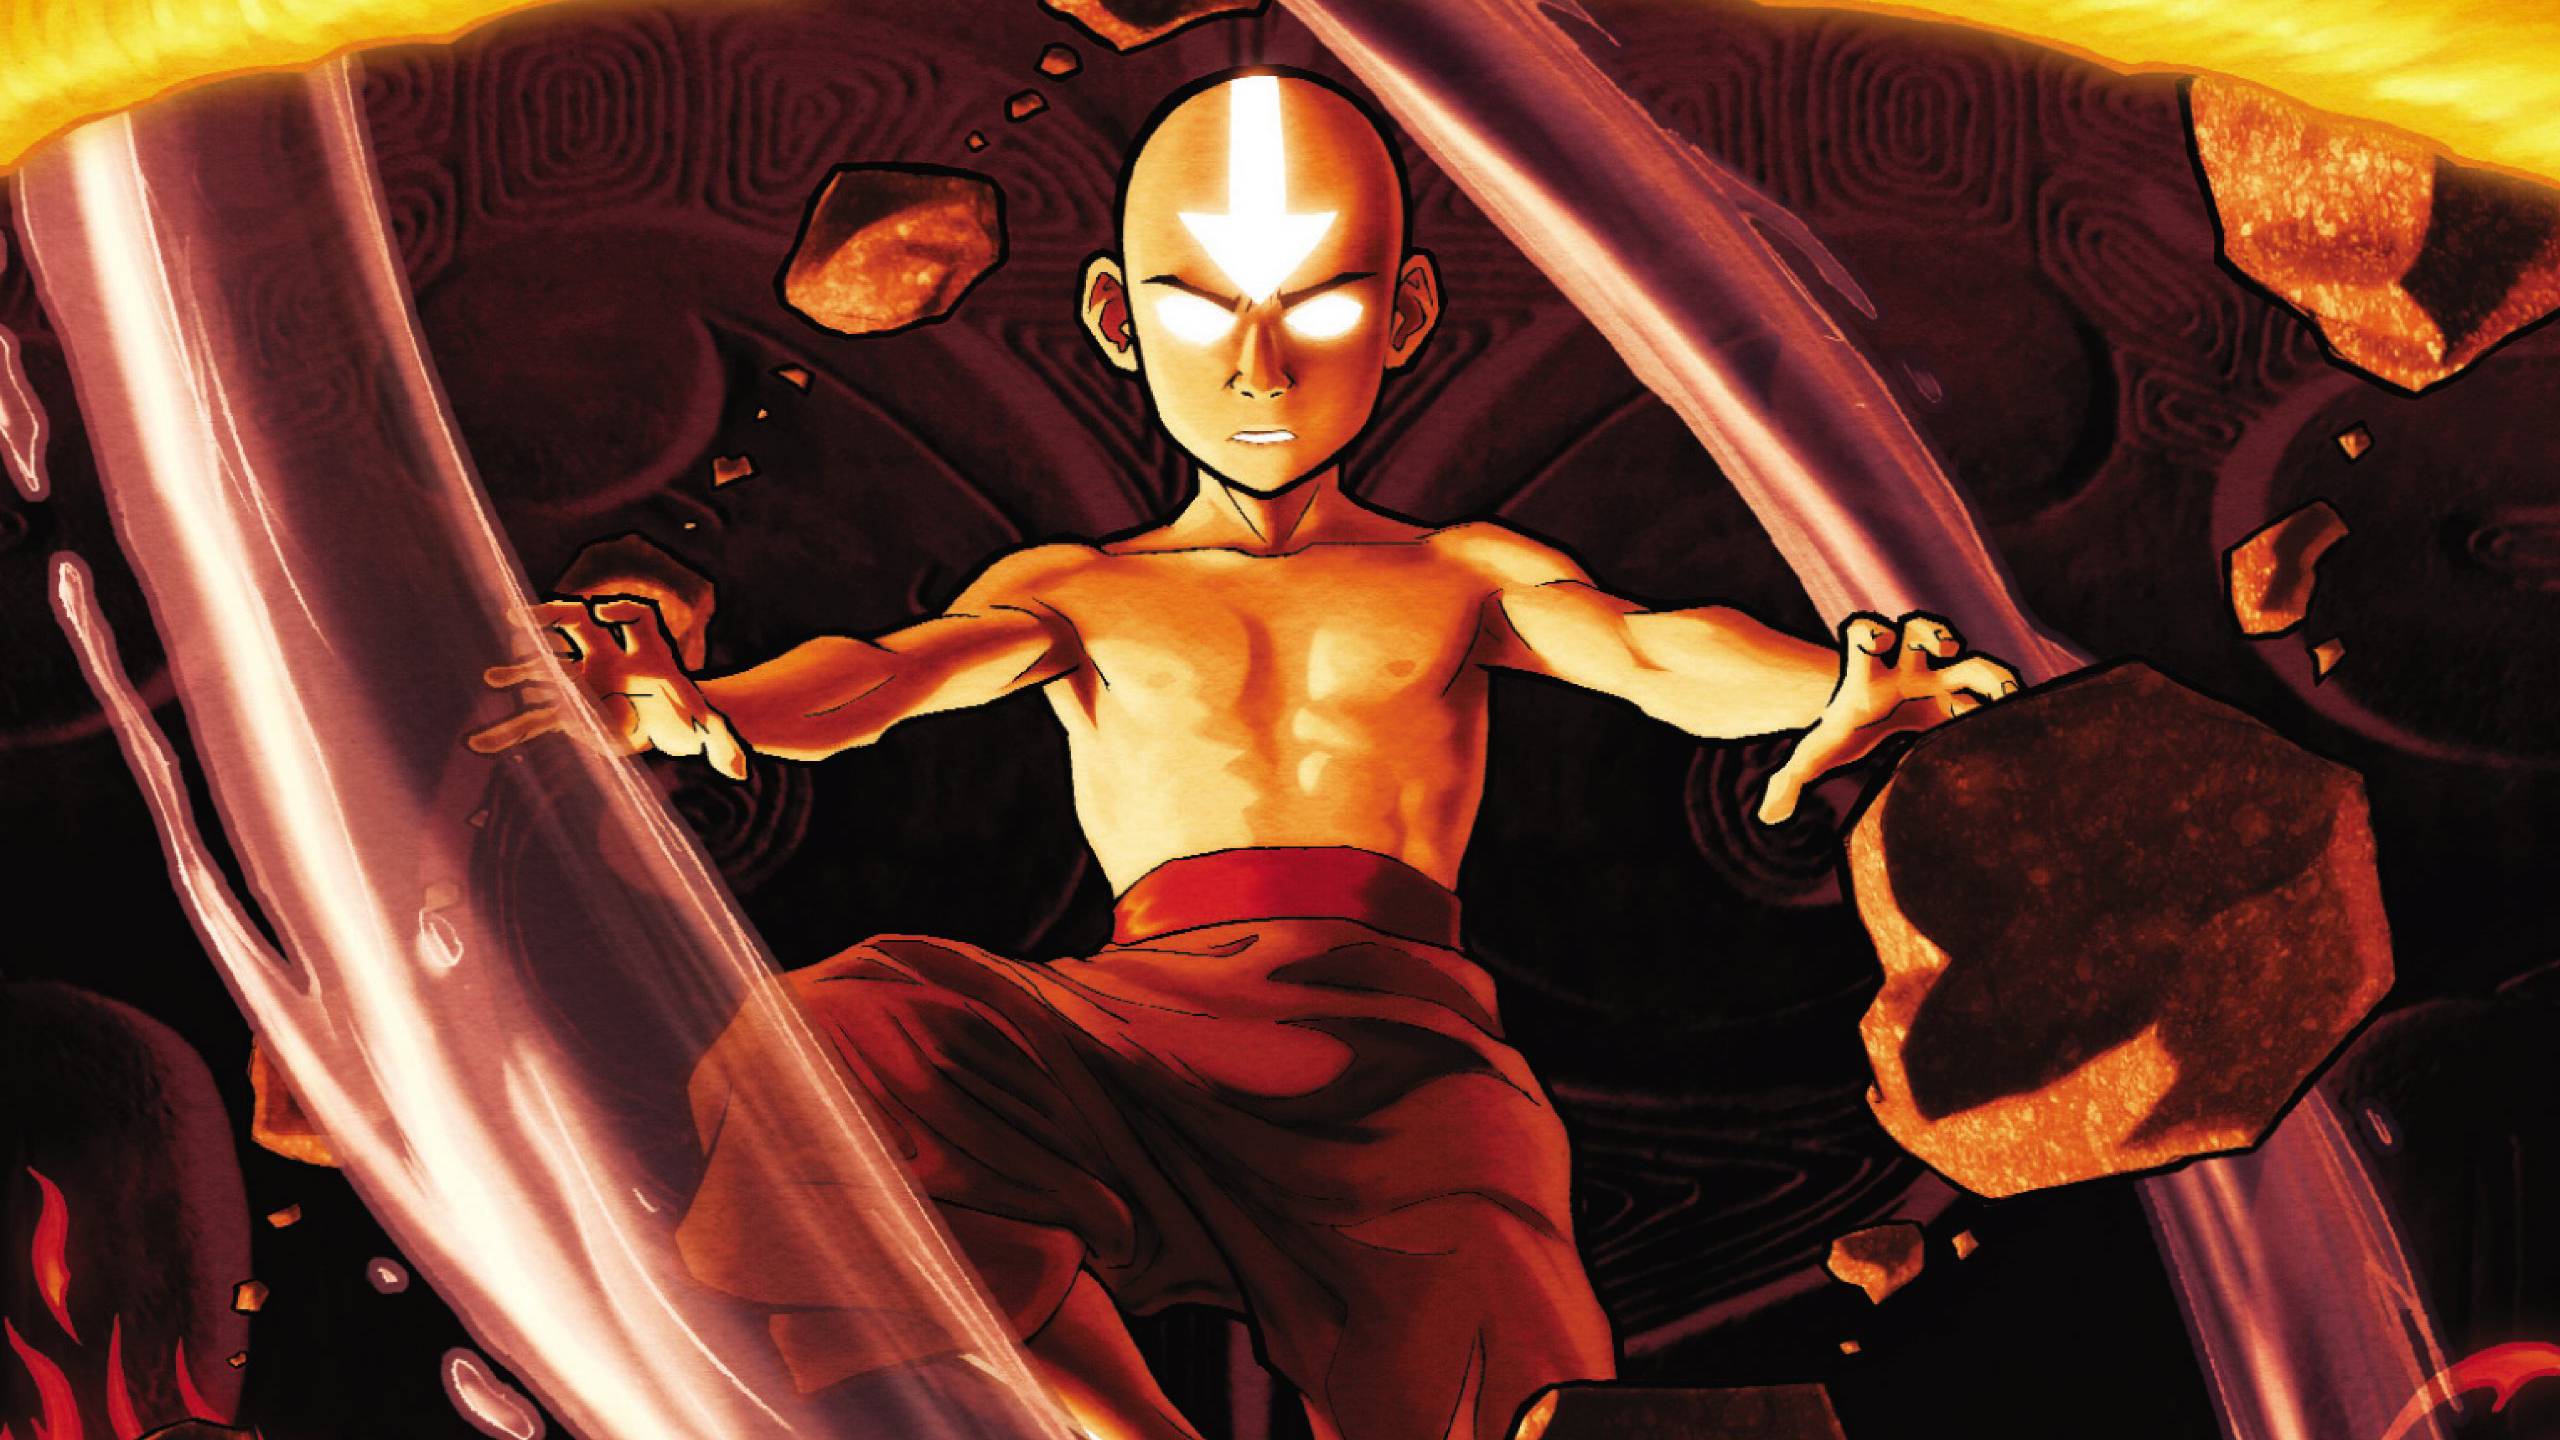 Image For > Avatar The Last Airbender Wallpapers Characters